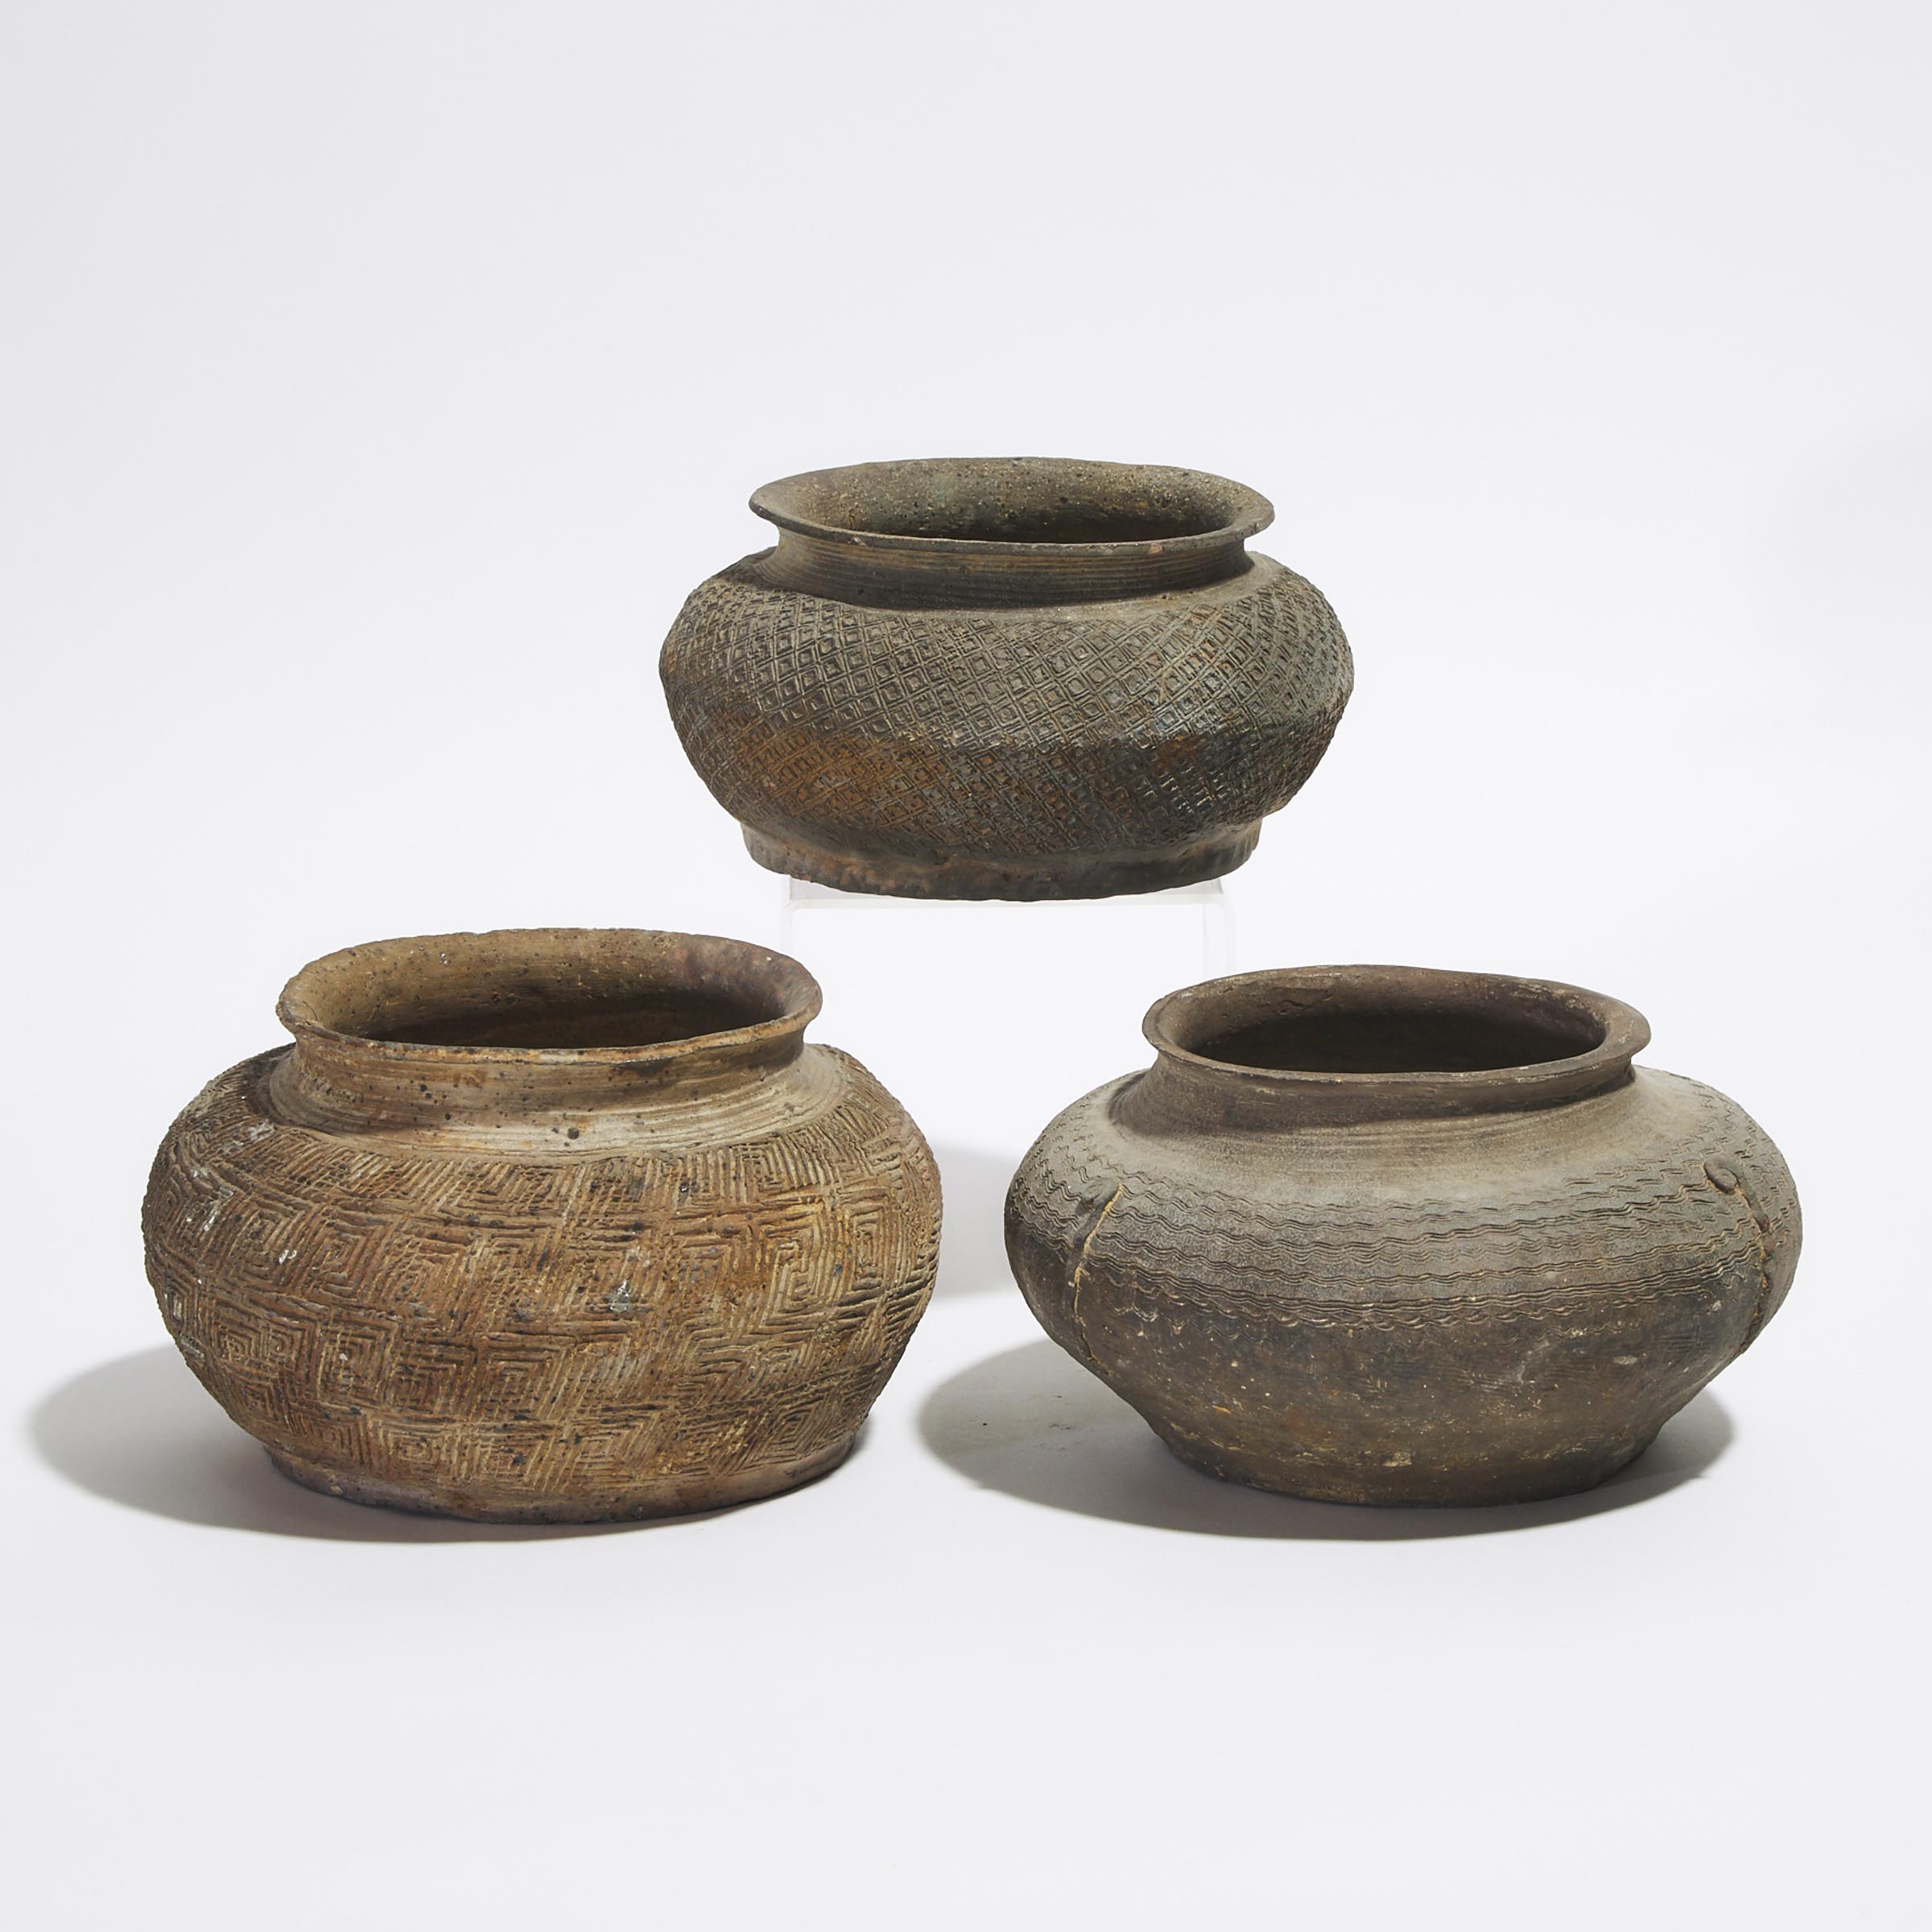 A Group of Three Pottery Jars, Warring States Period (475-221 BC)